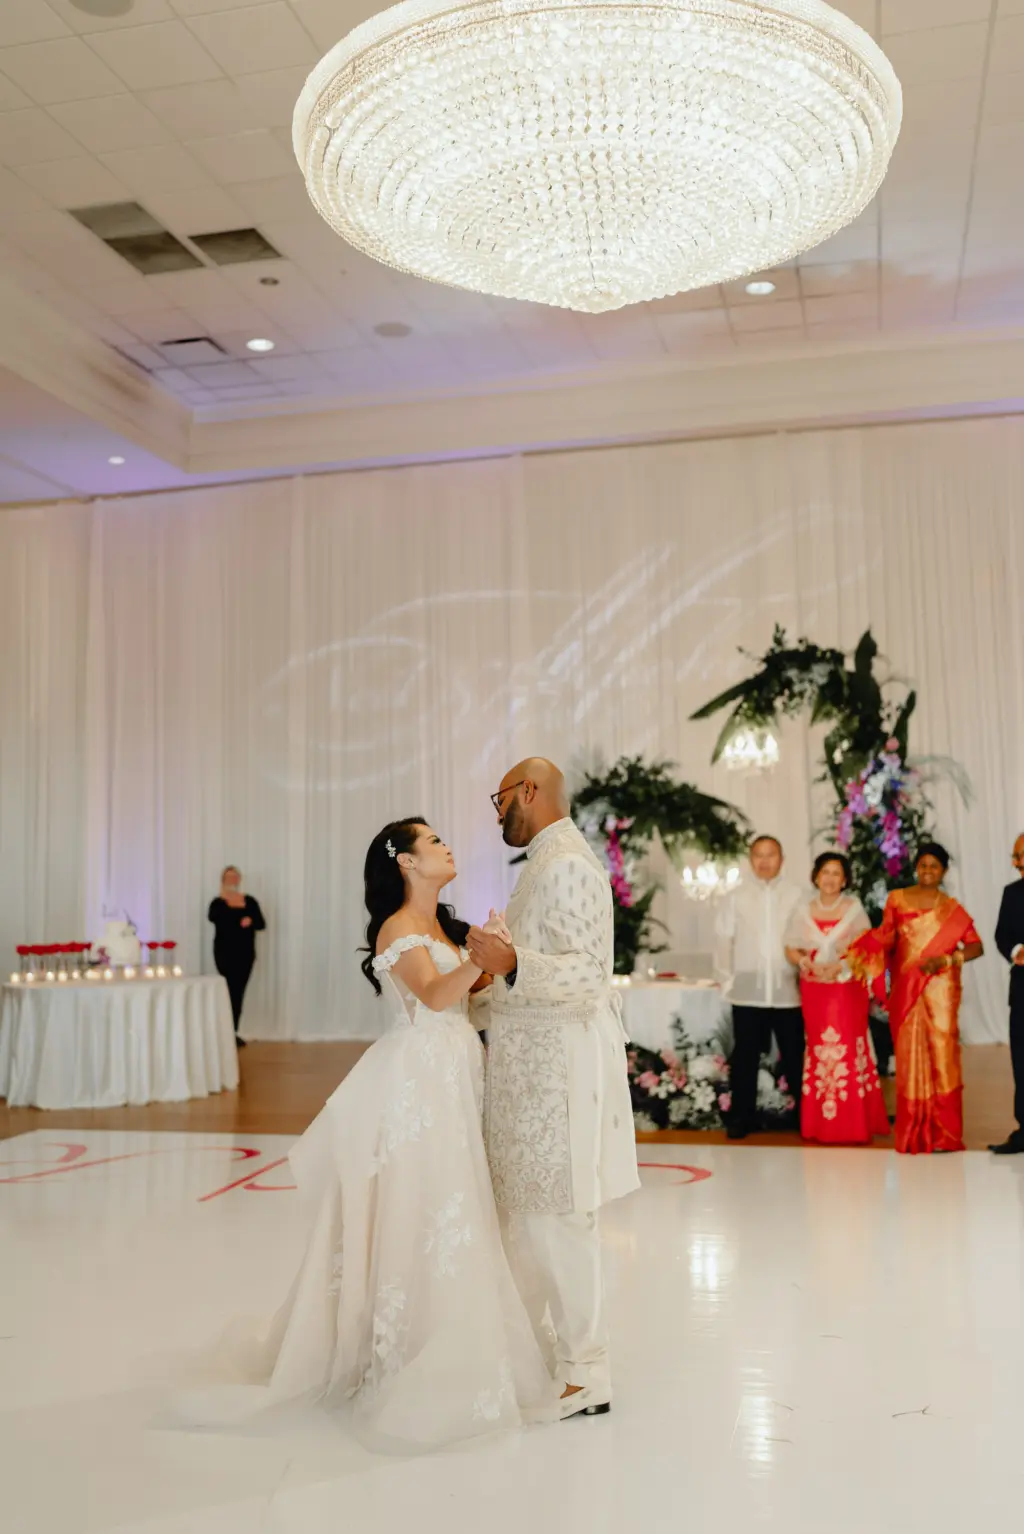 Bride and Groom First Dance Wedding Portrait in Timeless Ballroom | Tampa Venue The Regent